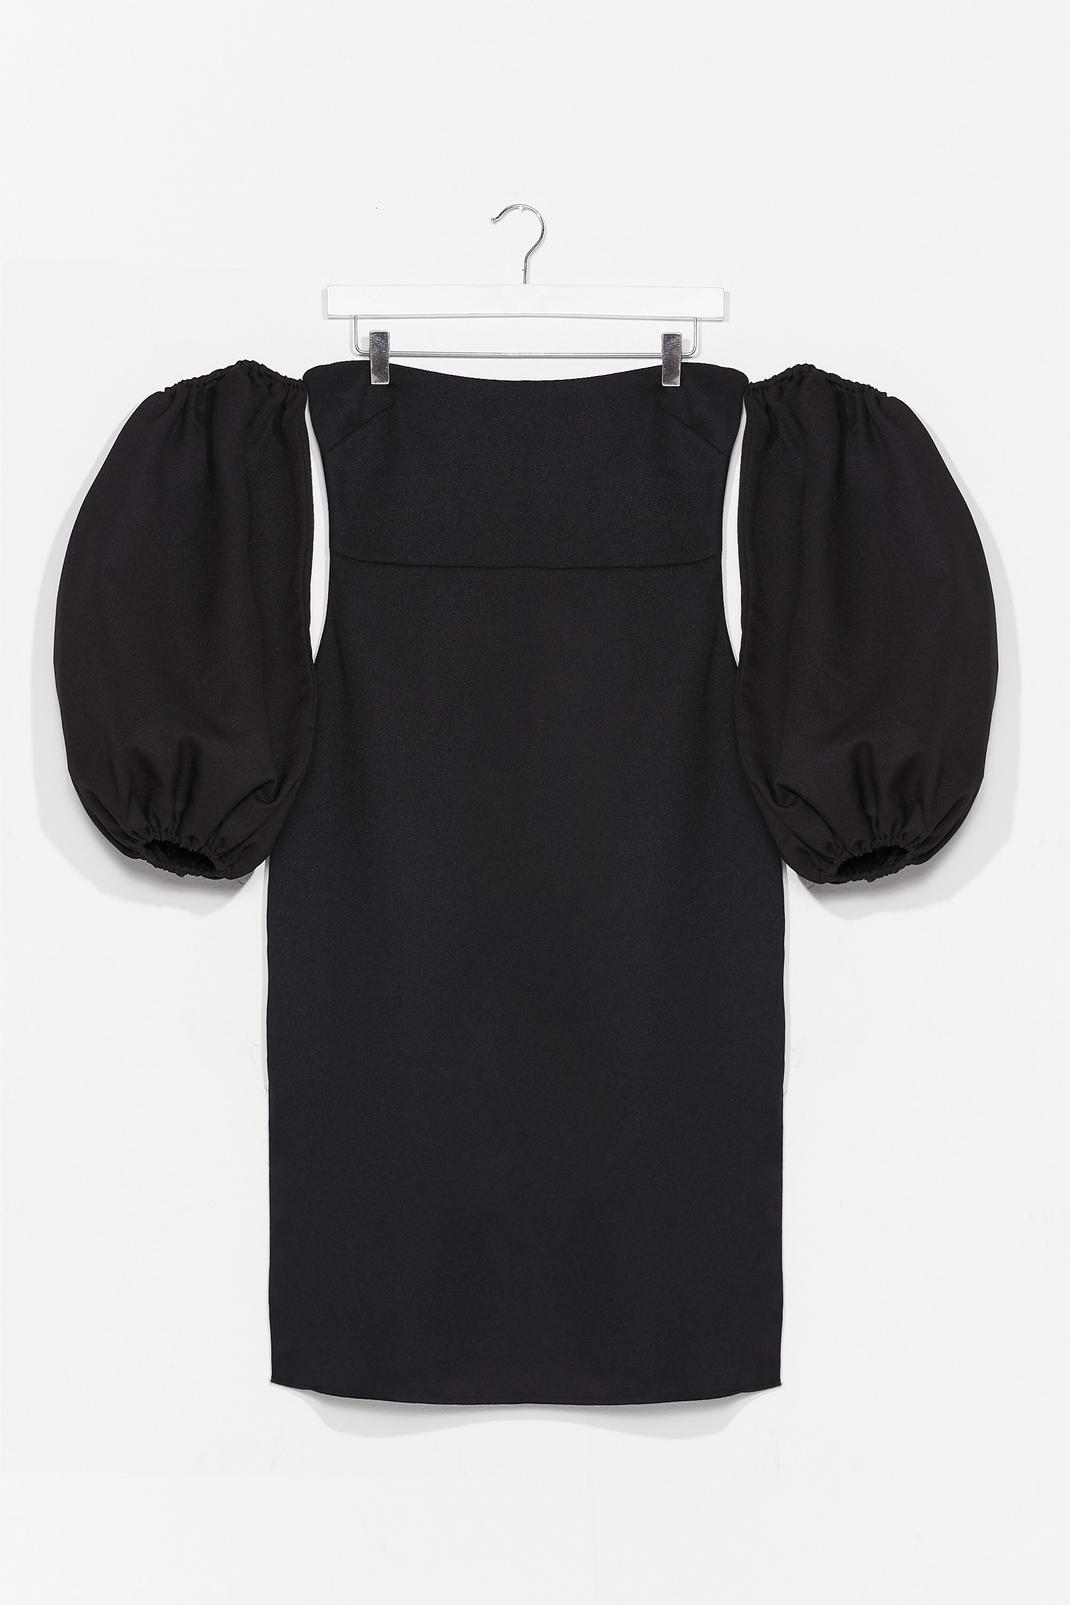 Black Balloon Sleeve Off The Shoulder Bodycon Midi Dress image number 1